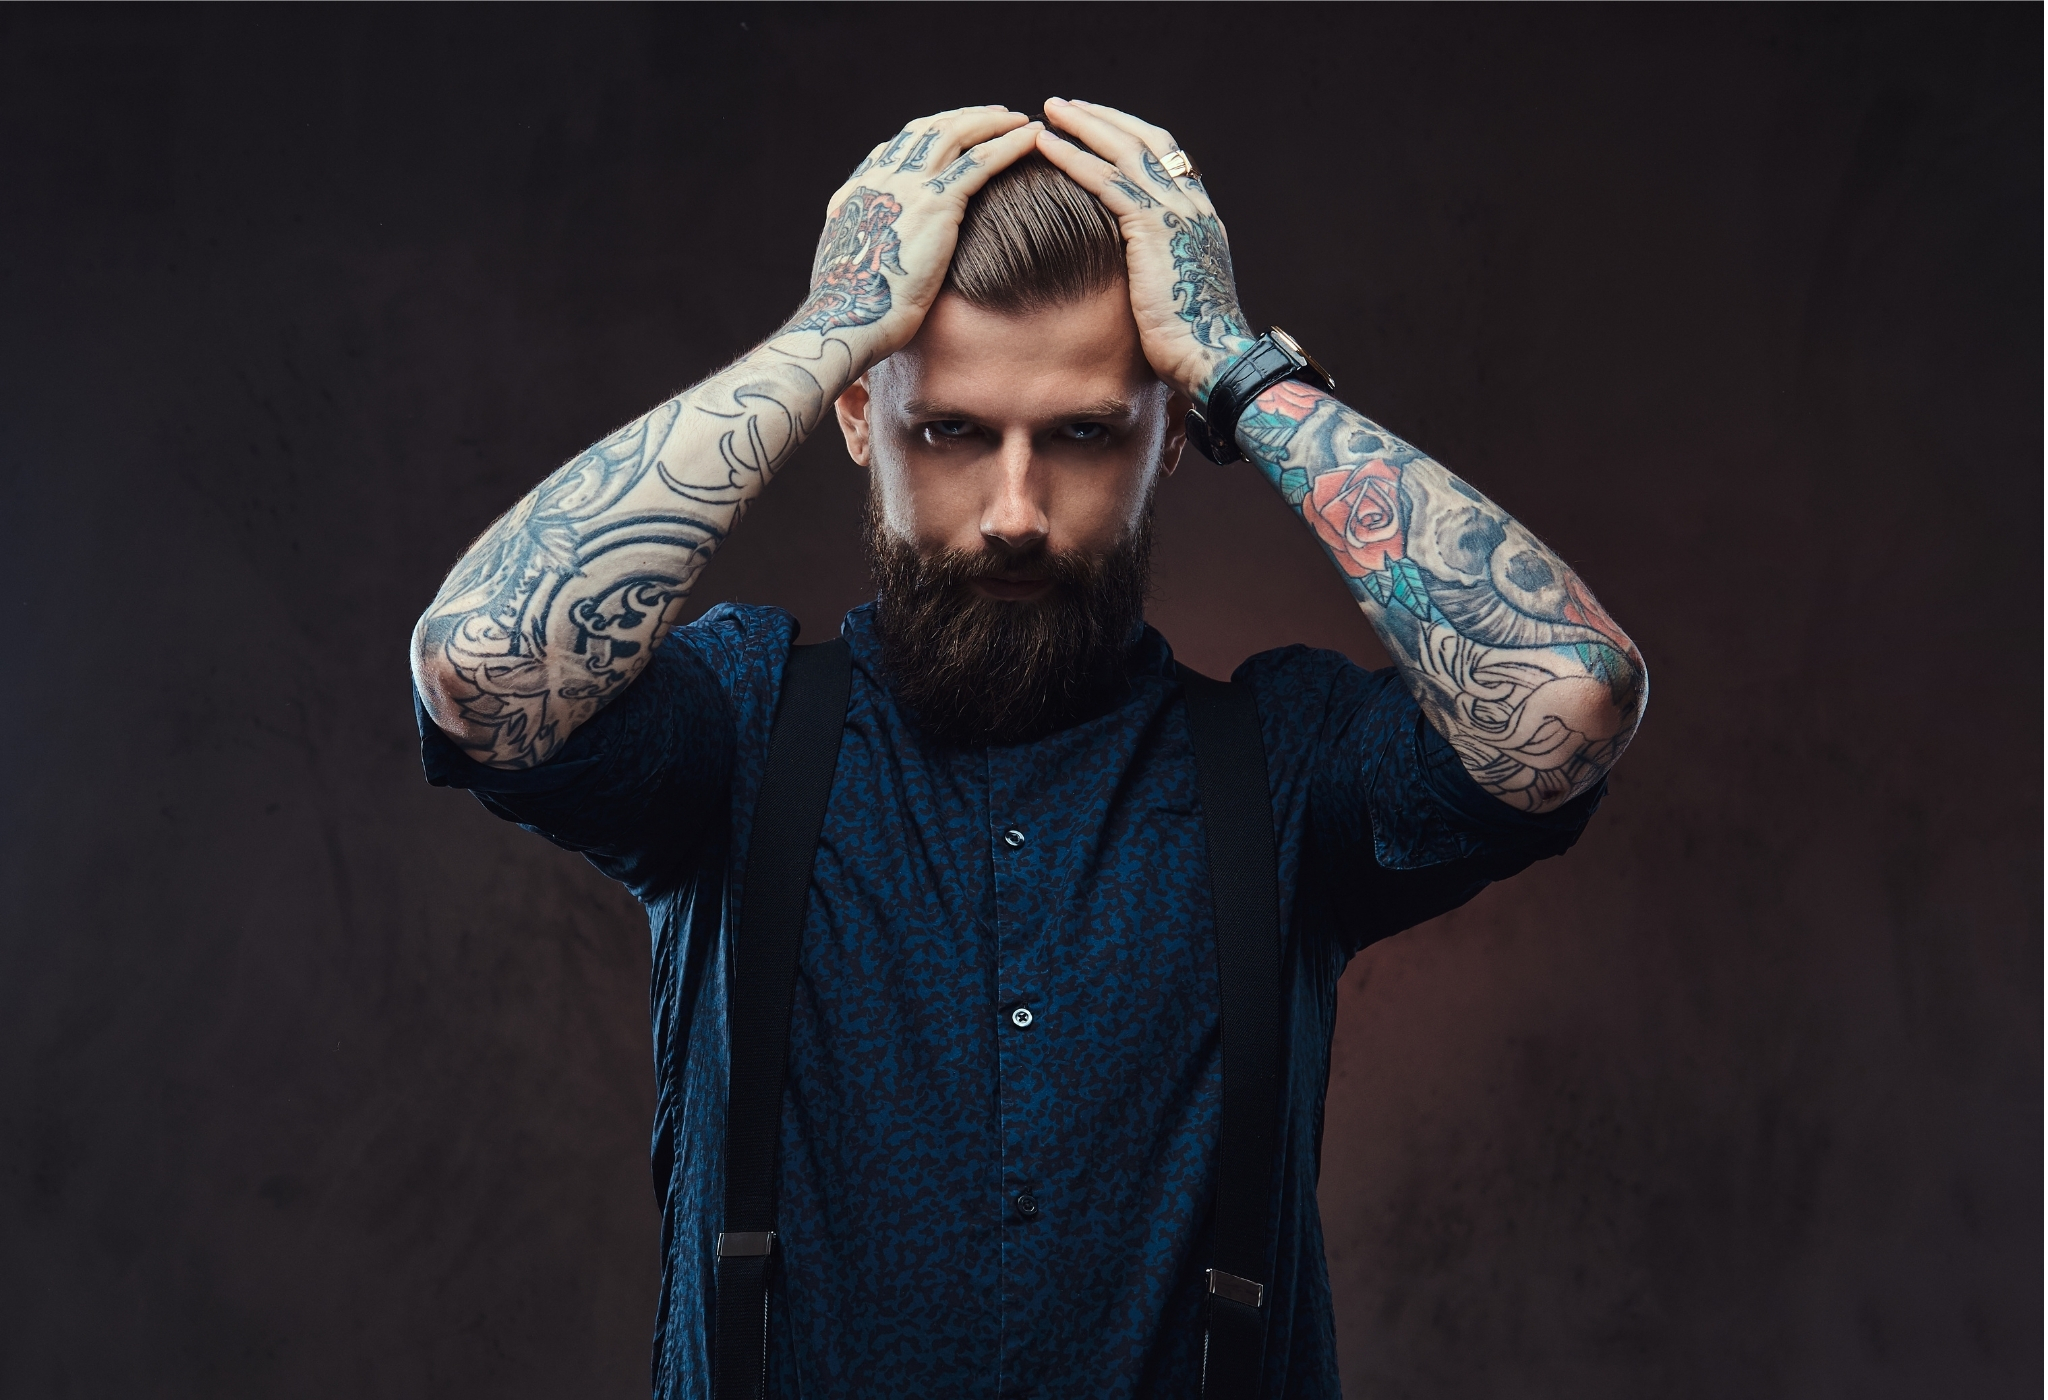 concerned man with tattoos